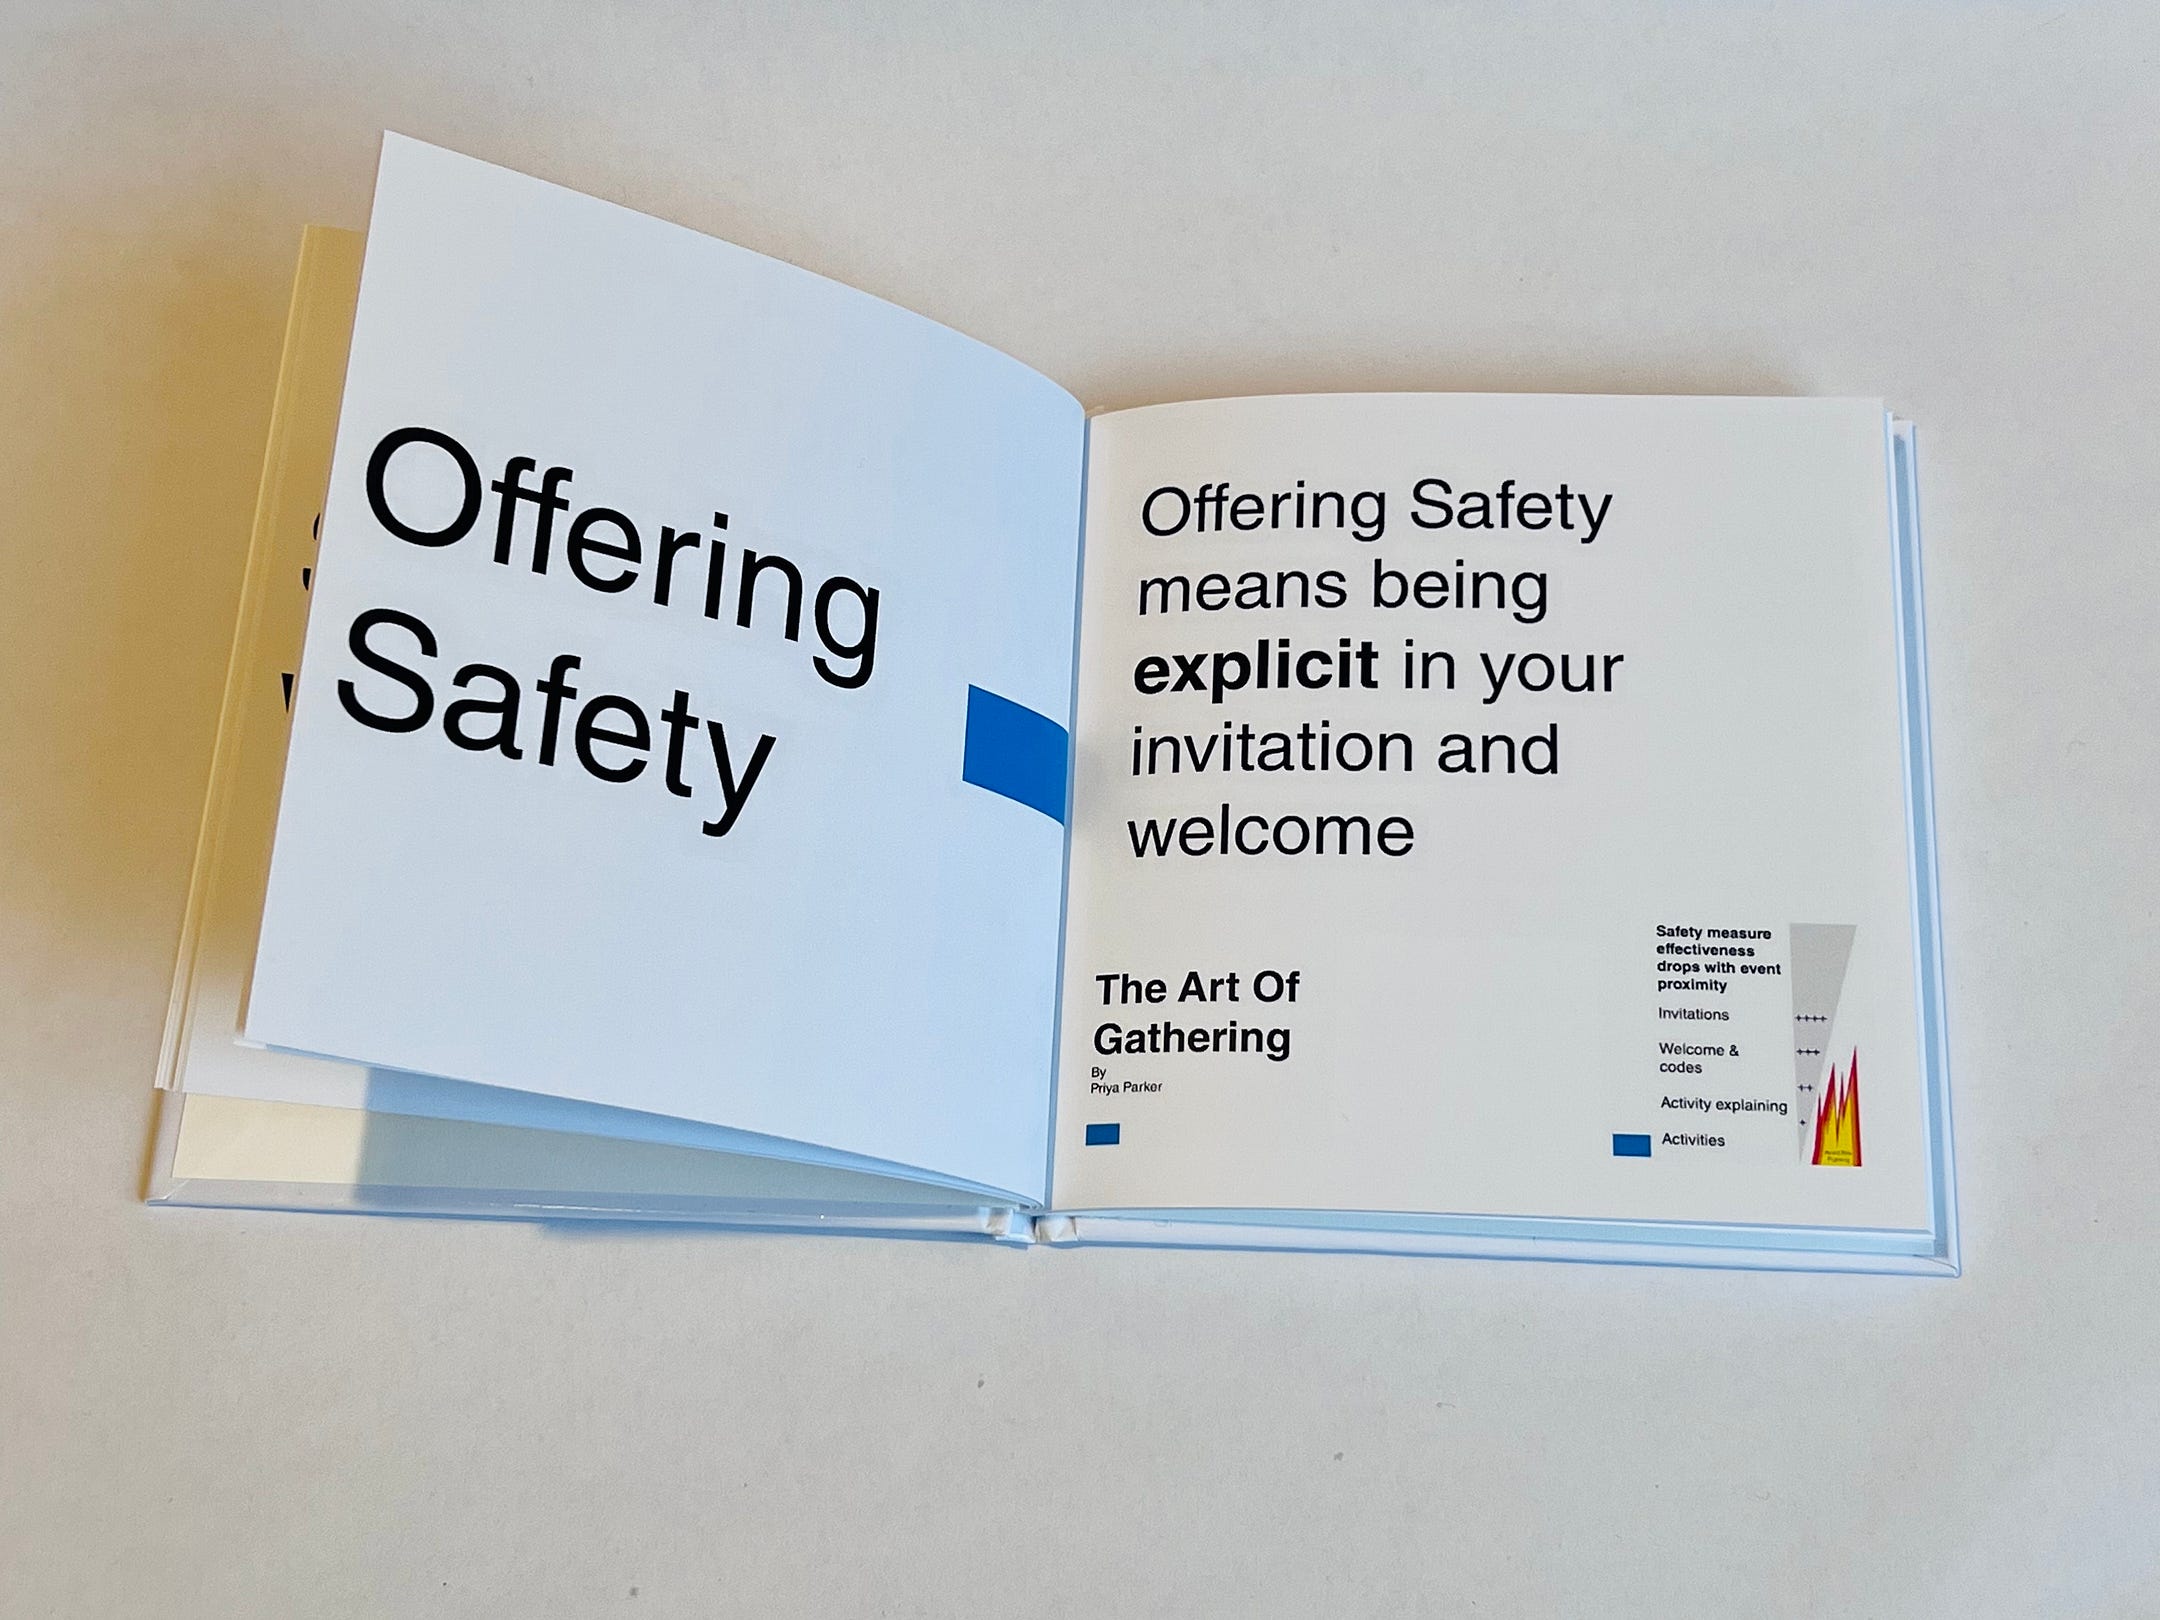 Offering safety and thinking about how to offer it before the workshop in invitations and welcomes